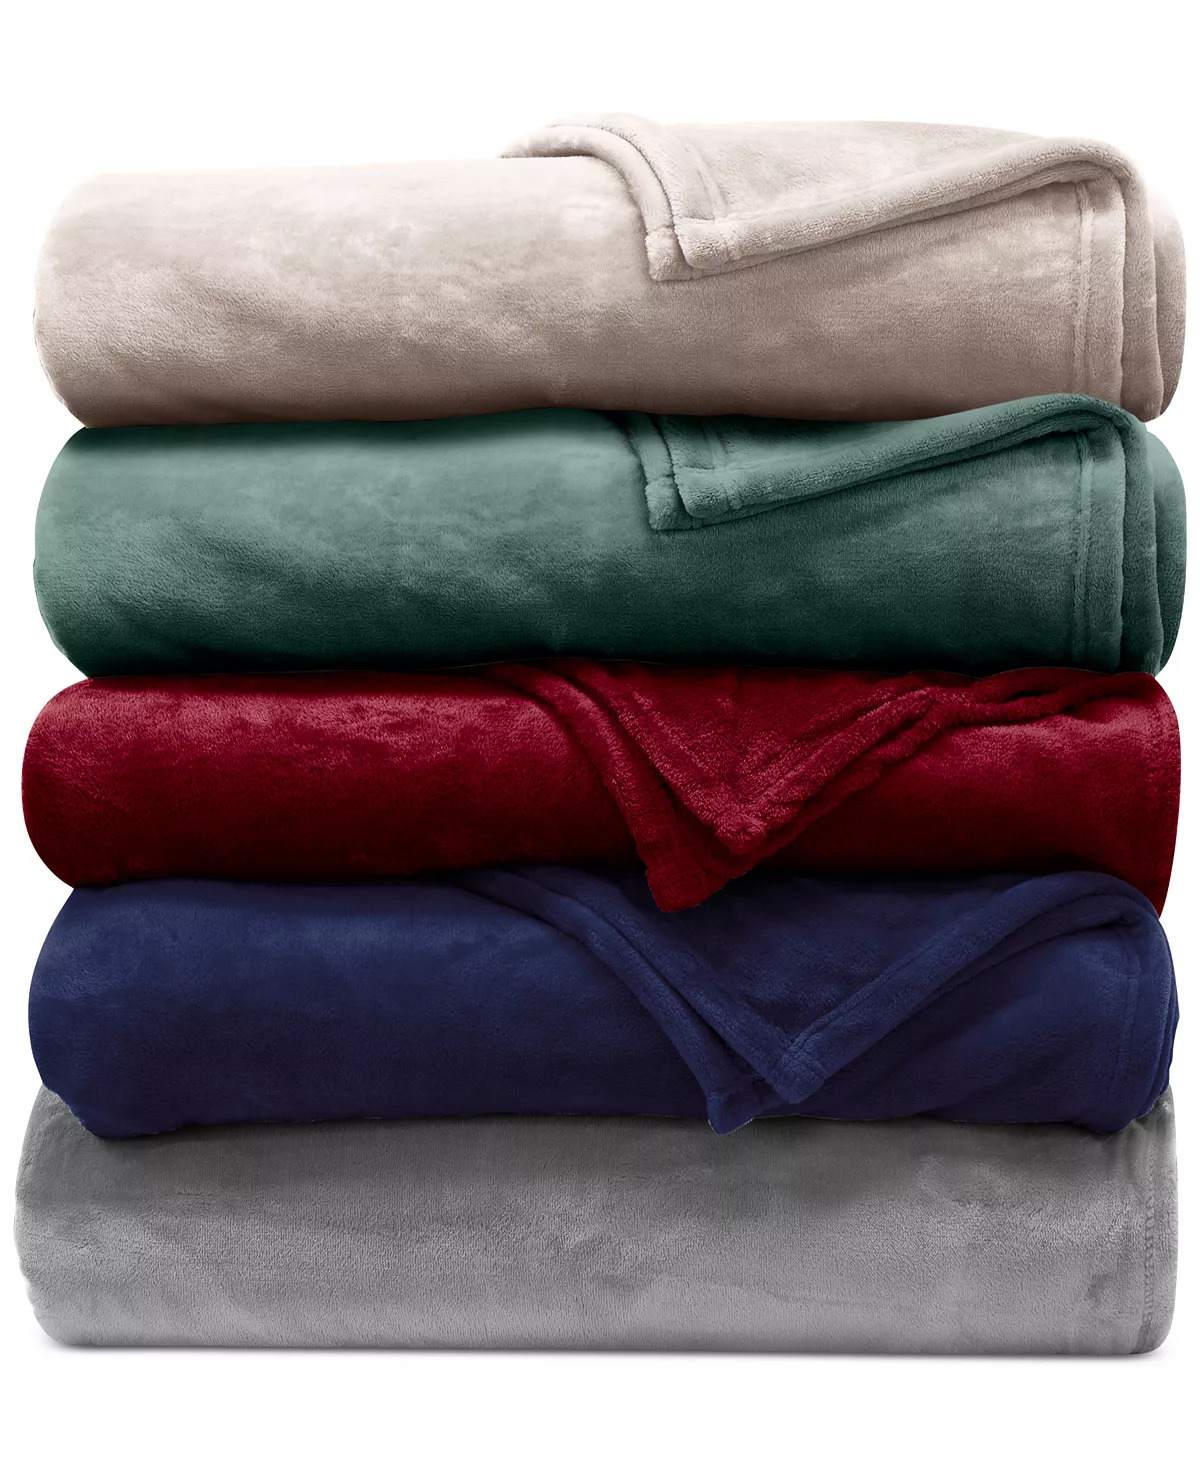 Lauren Ralph Lauren Micromink Plush Blanket (various colors): Twin $19.20, Full/Queen $21.60 & More + Free Store Pickup at Macys or Free Shipping on $25+